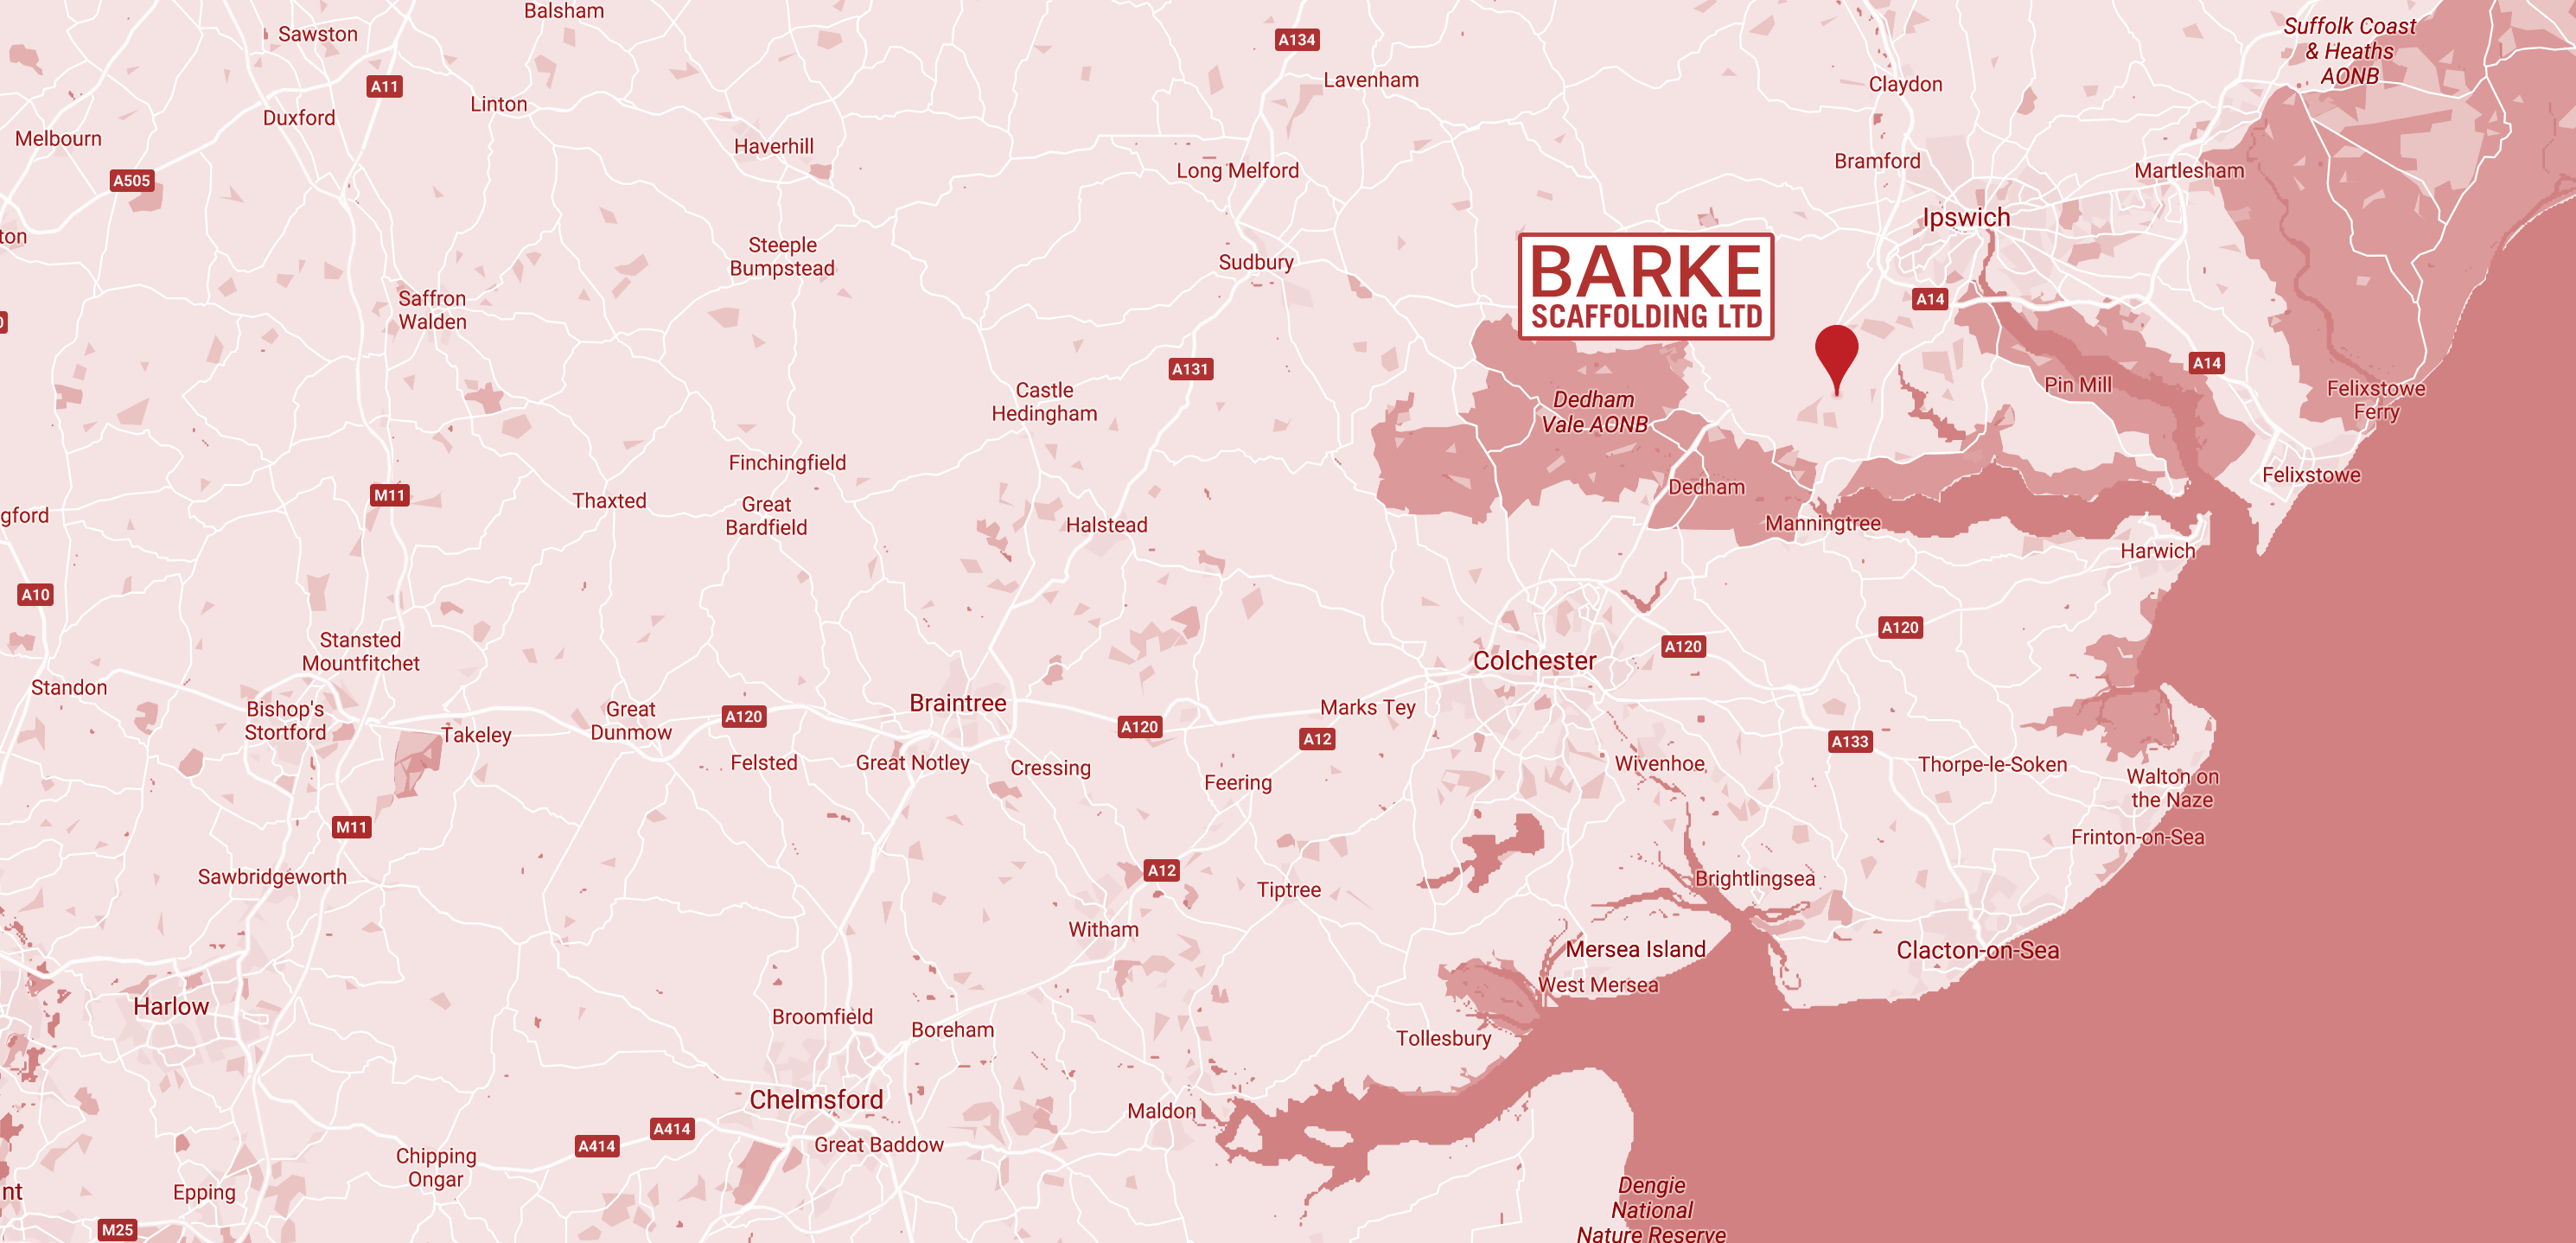 Barke Scaffolding Ltd - East Essex and Suffolk based Scaffolding Services - Contact Us